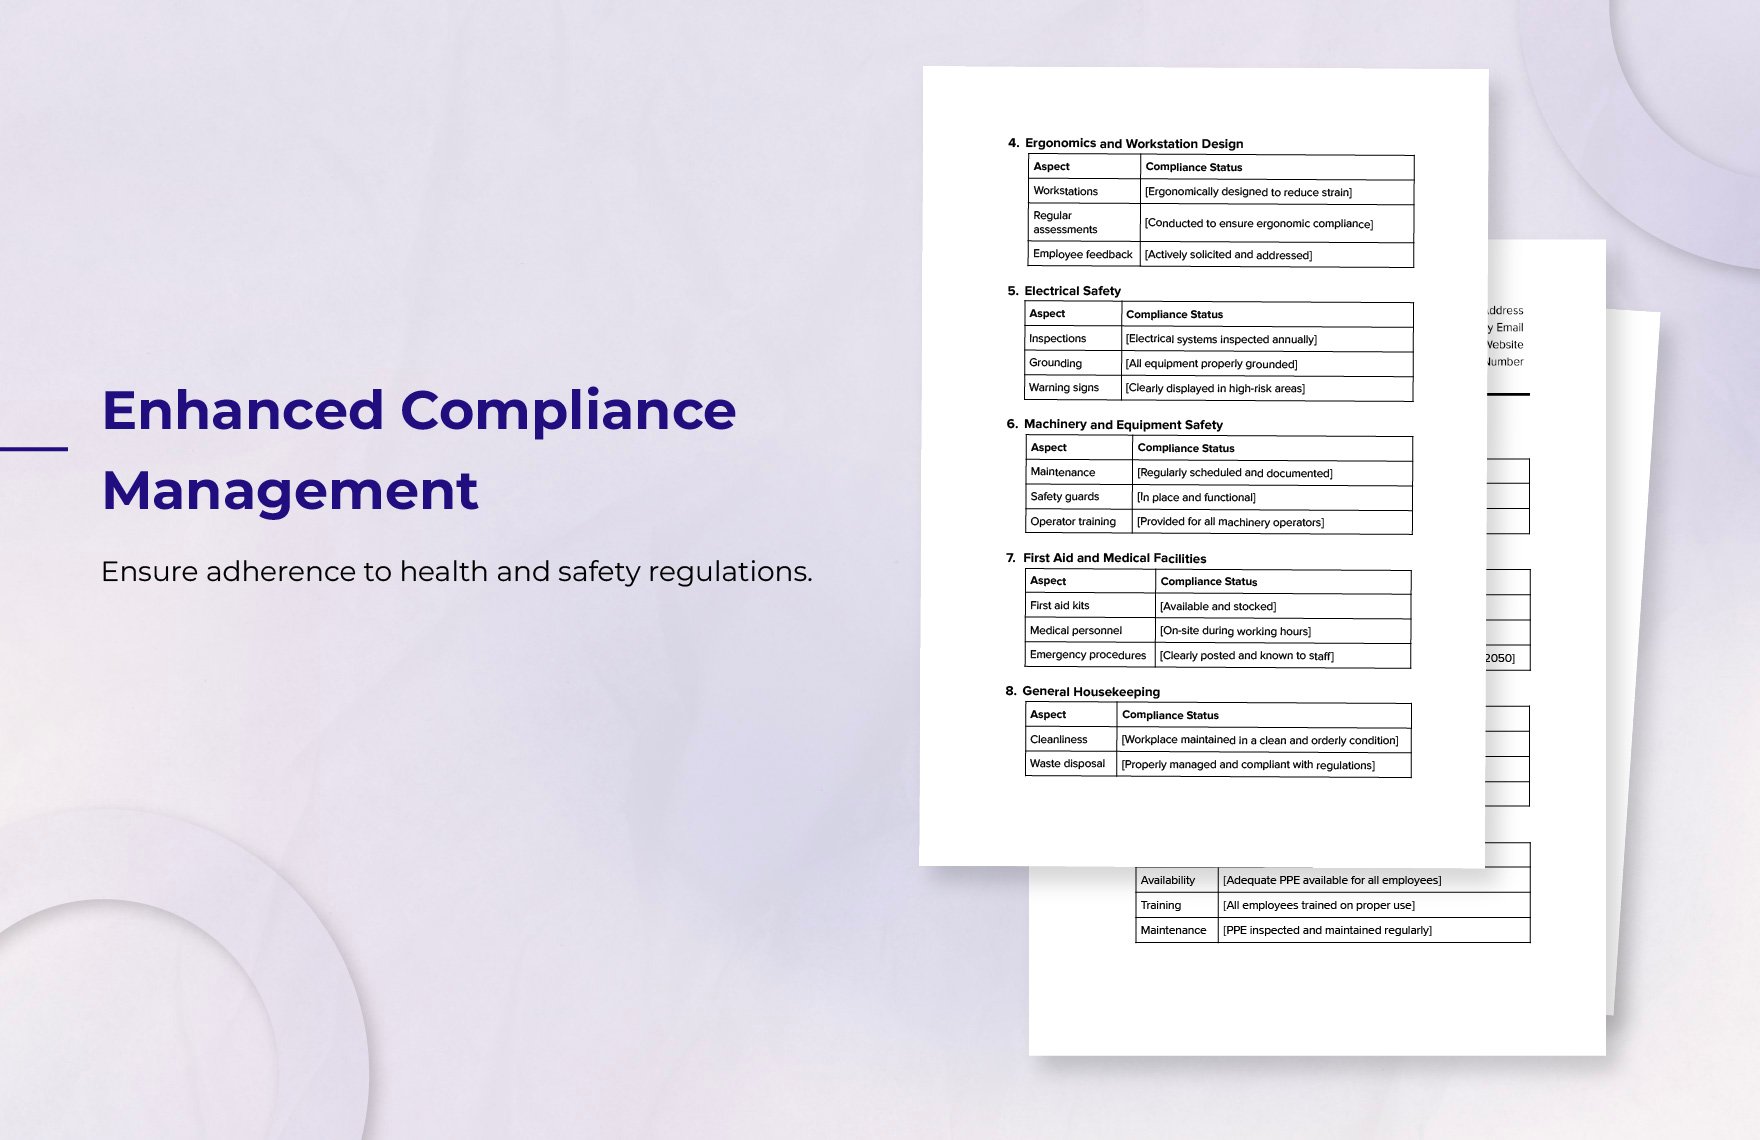 Workplace Inspection Compliance Template